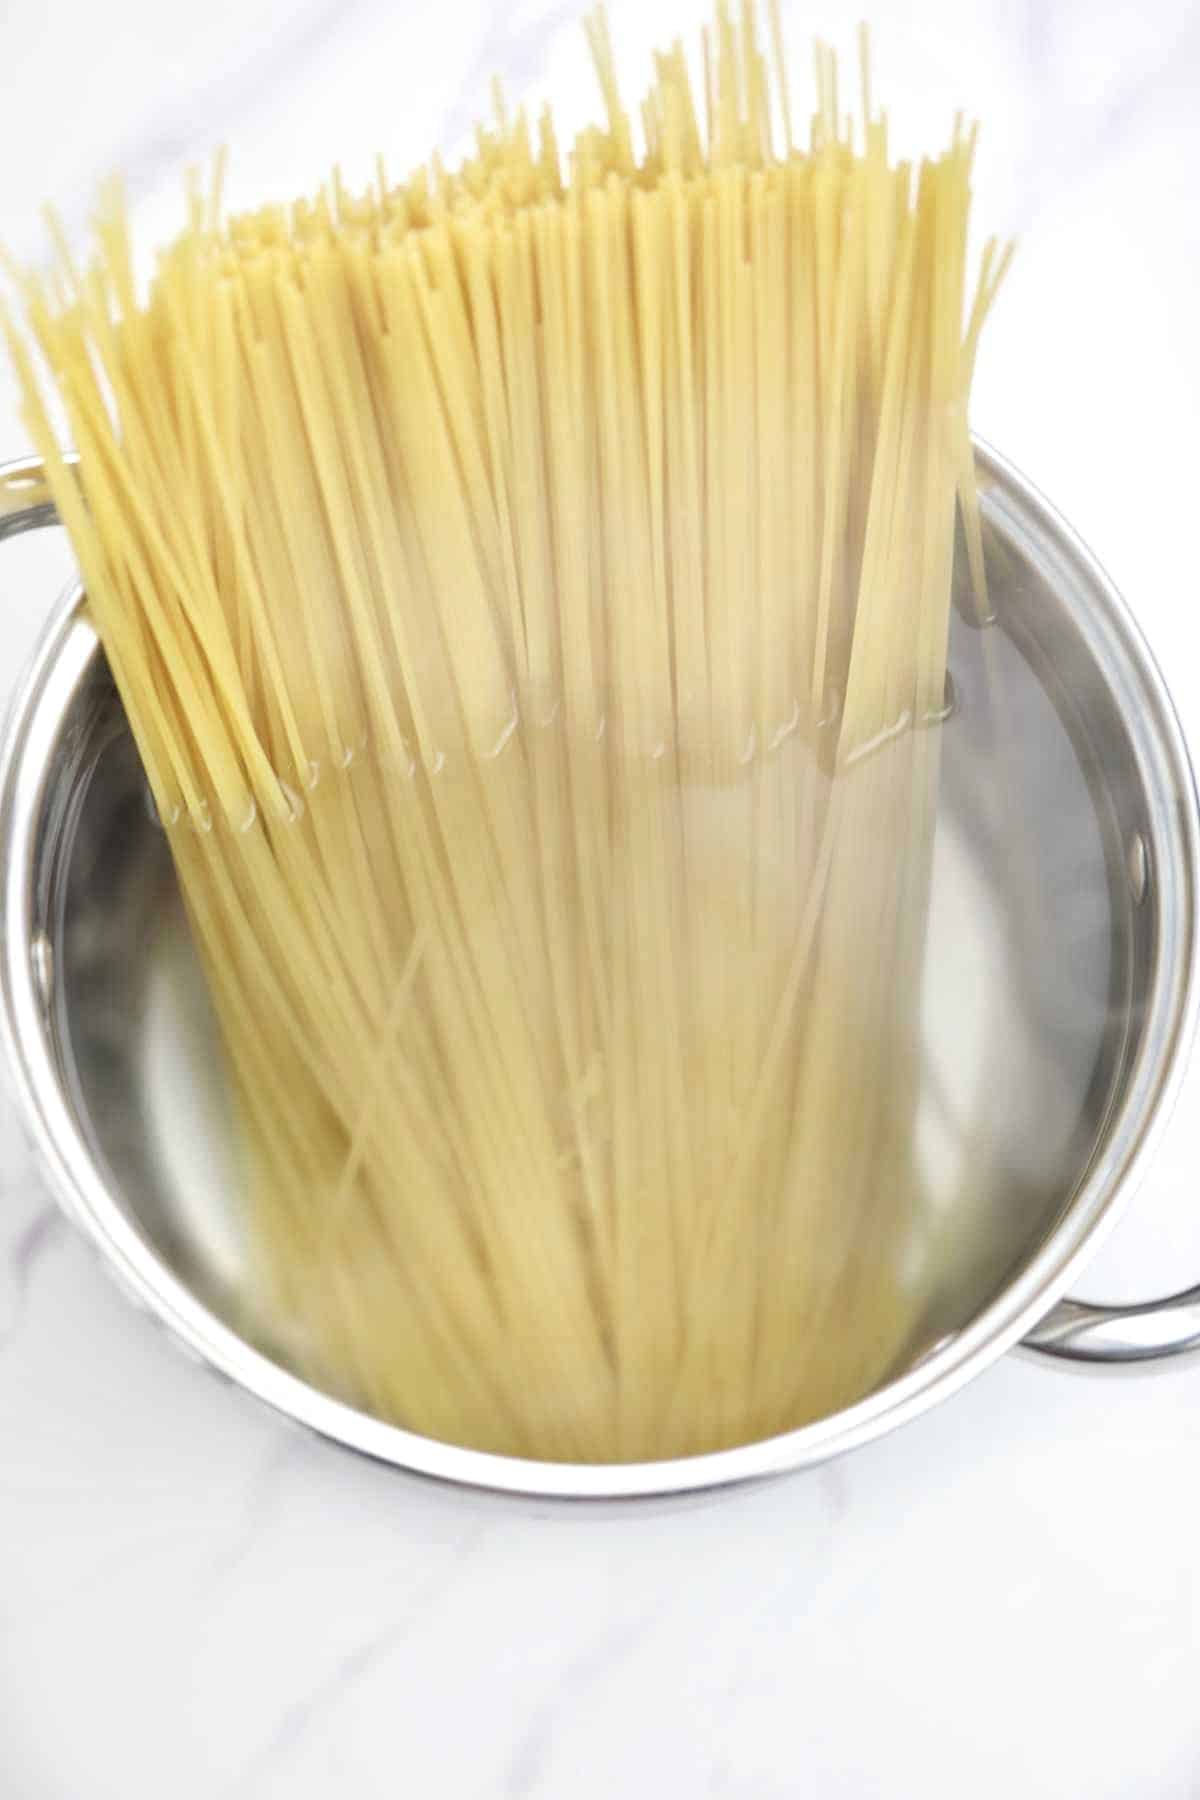 spaghetti added to a pot of boiling water.